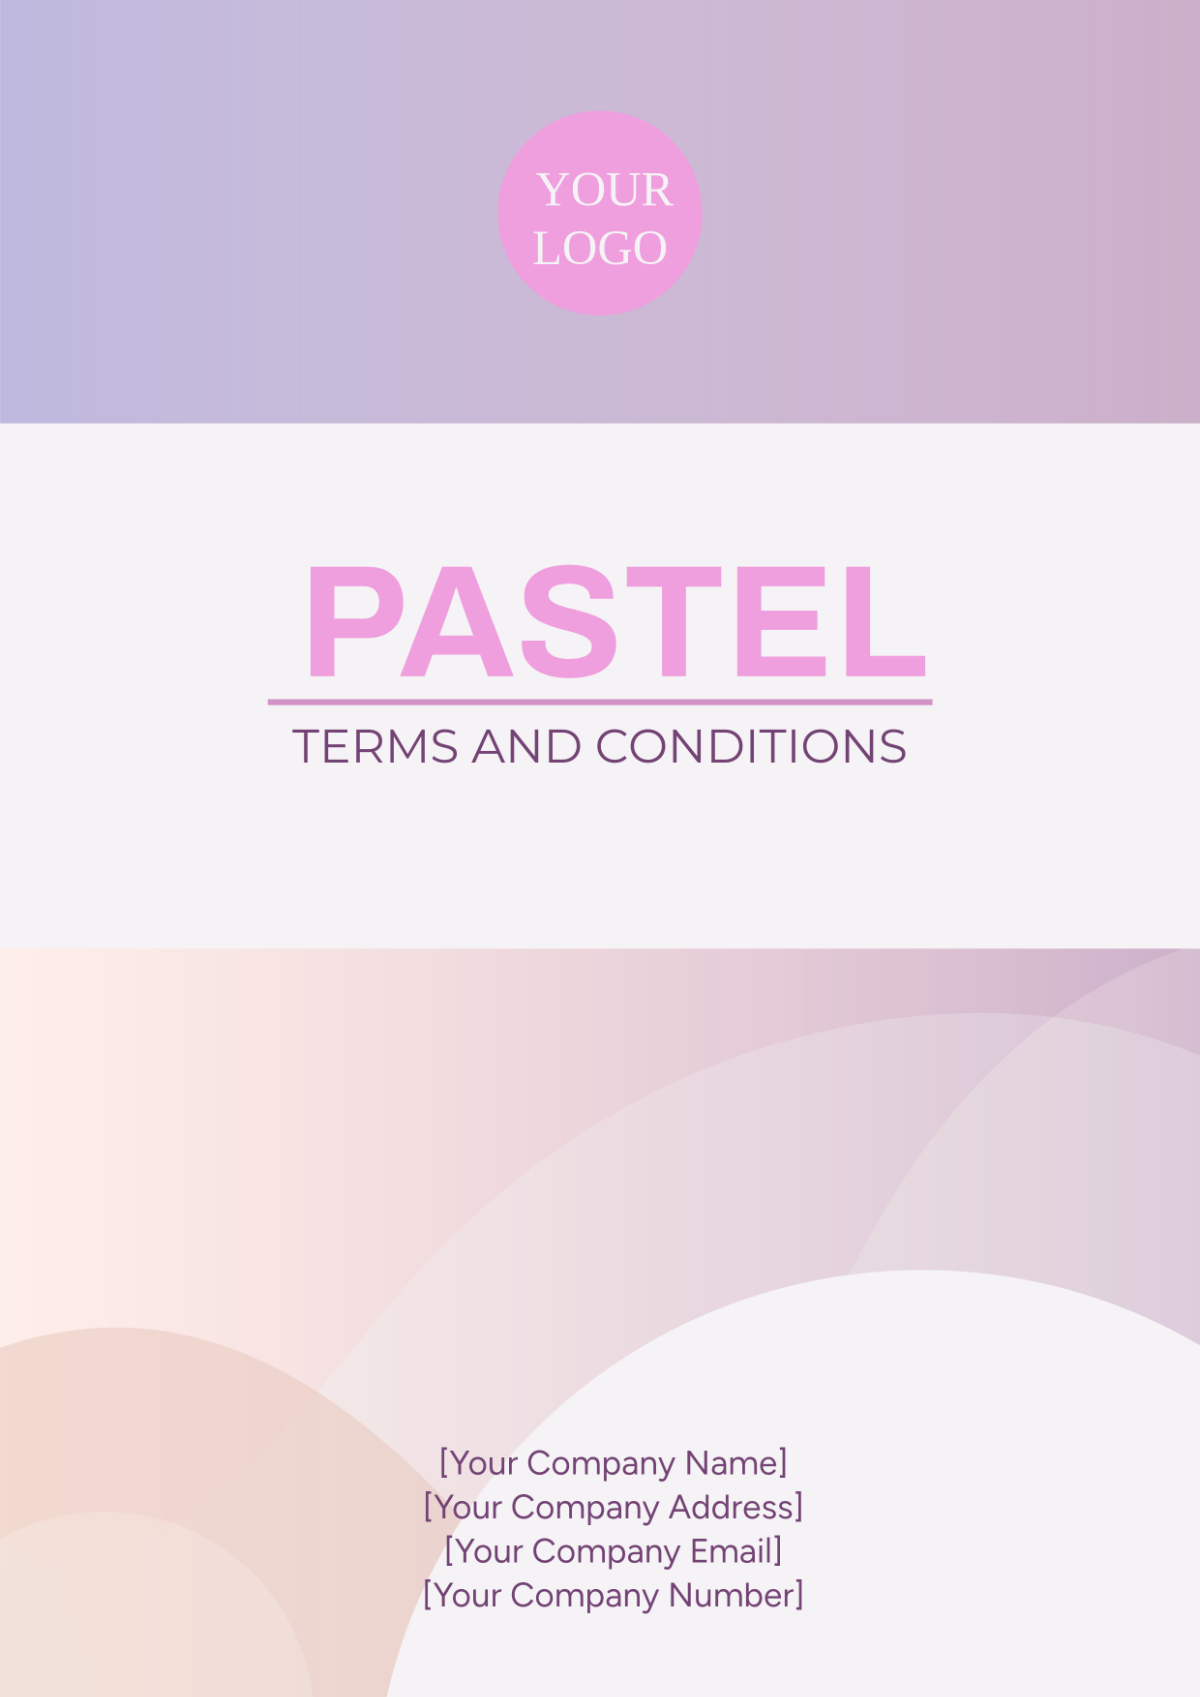 Pastel Terms and Conditions Cover Page